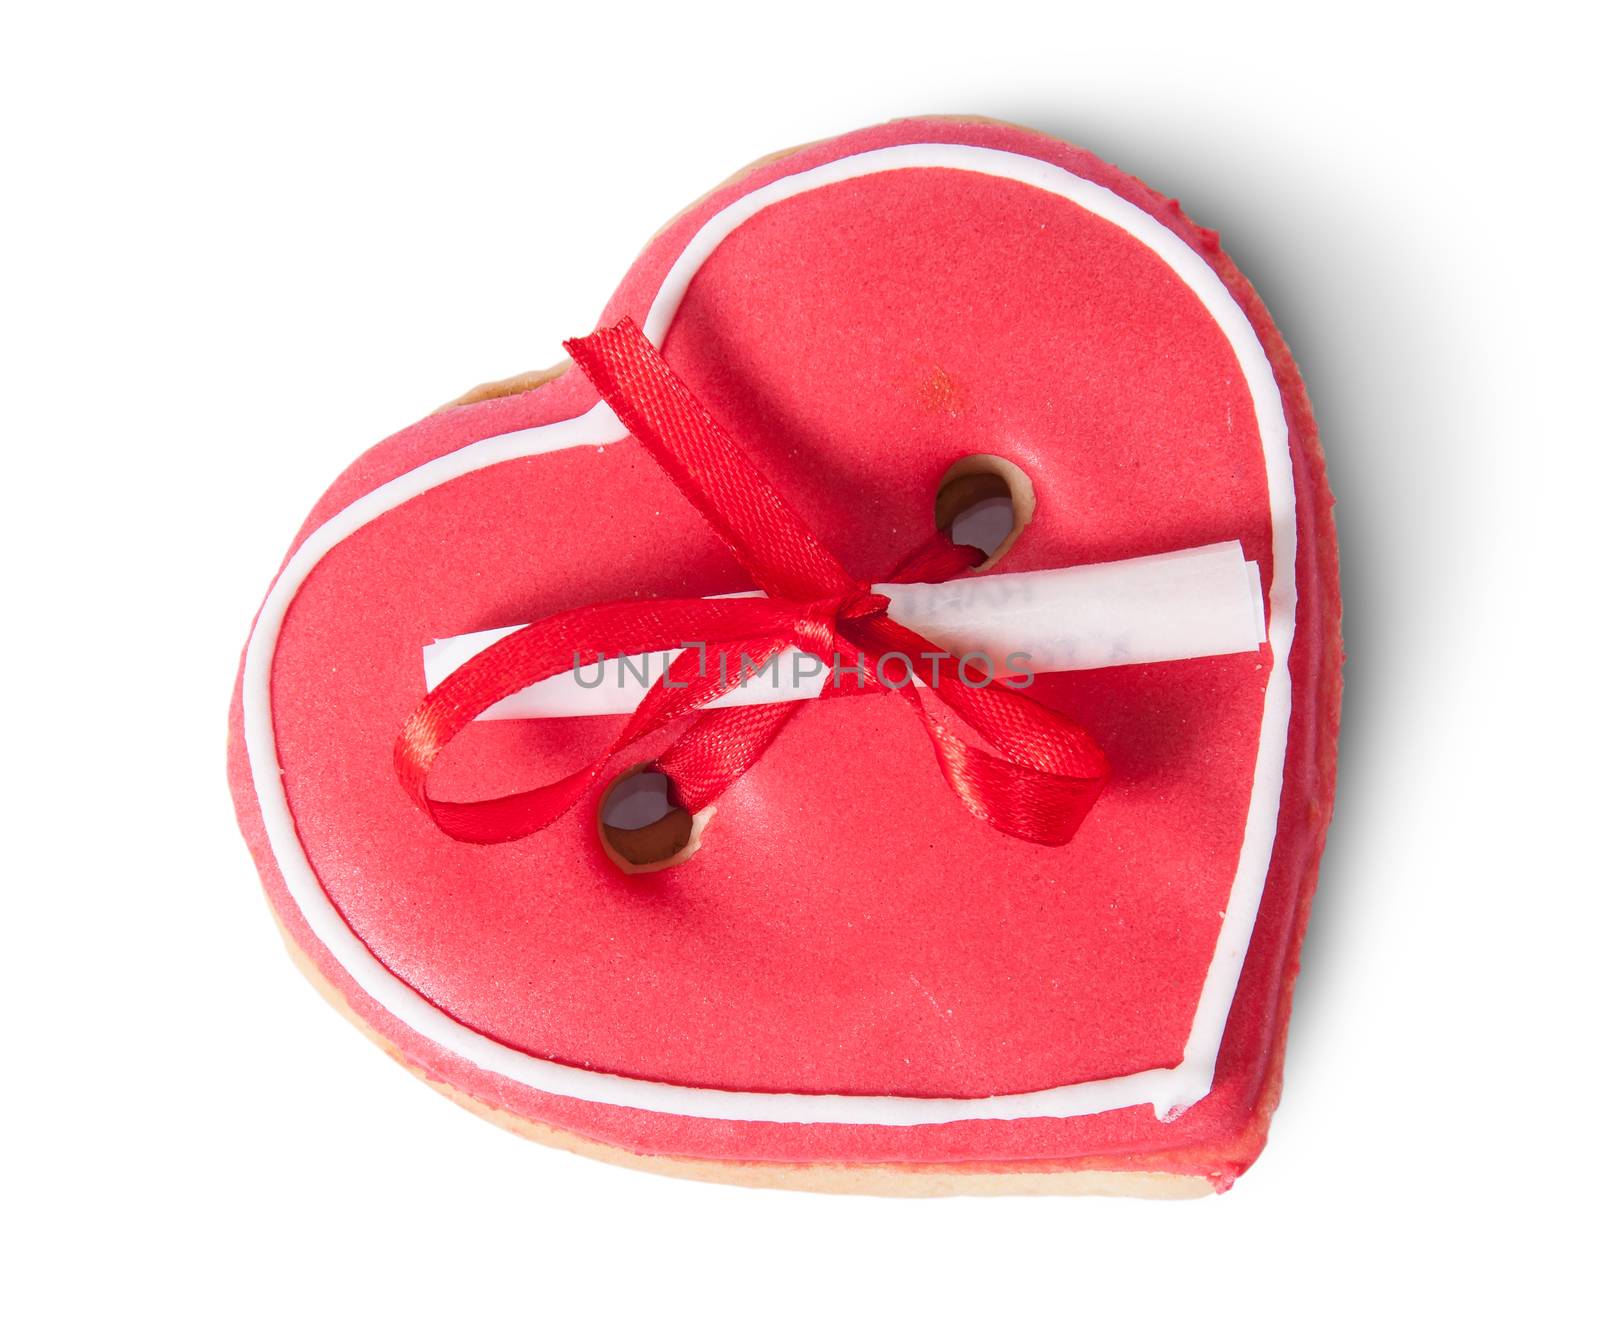 Cookies heart with note on top by Cipariss